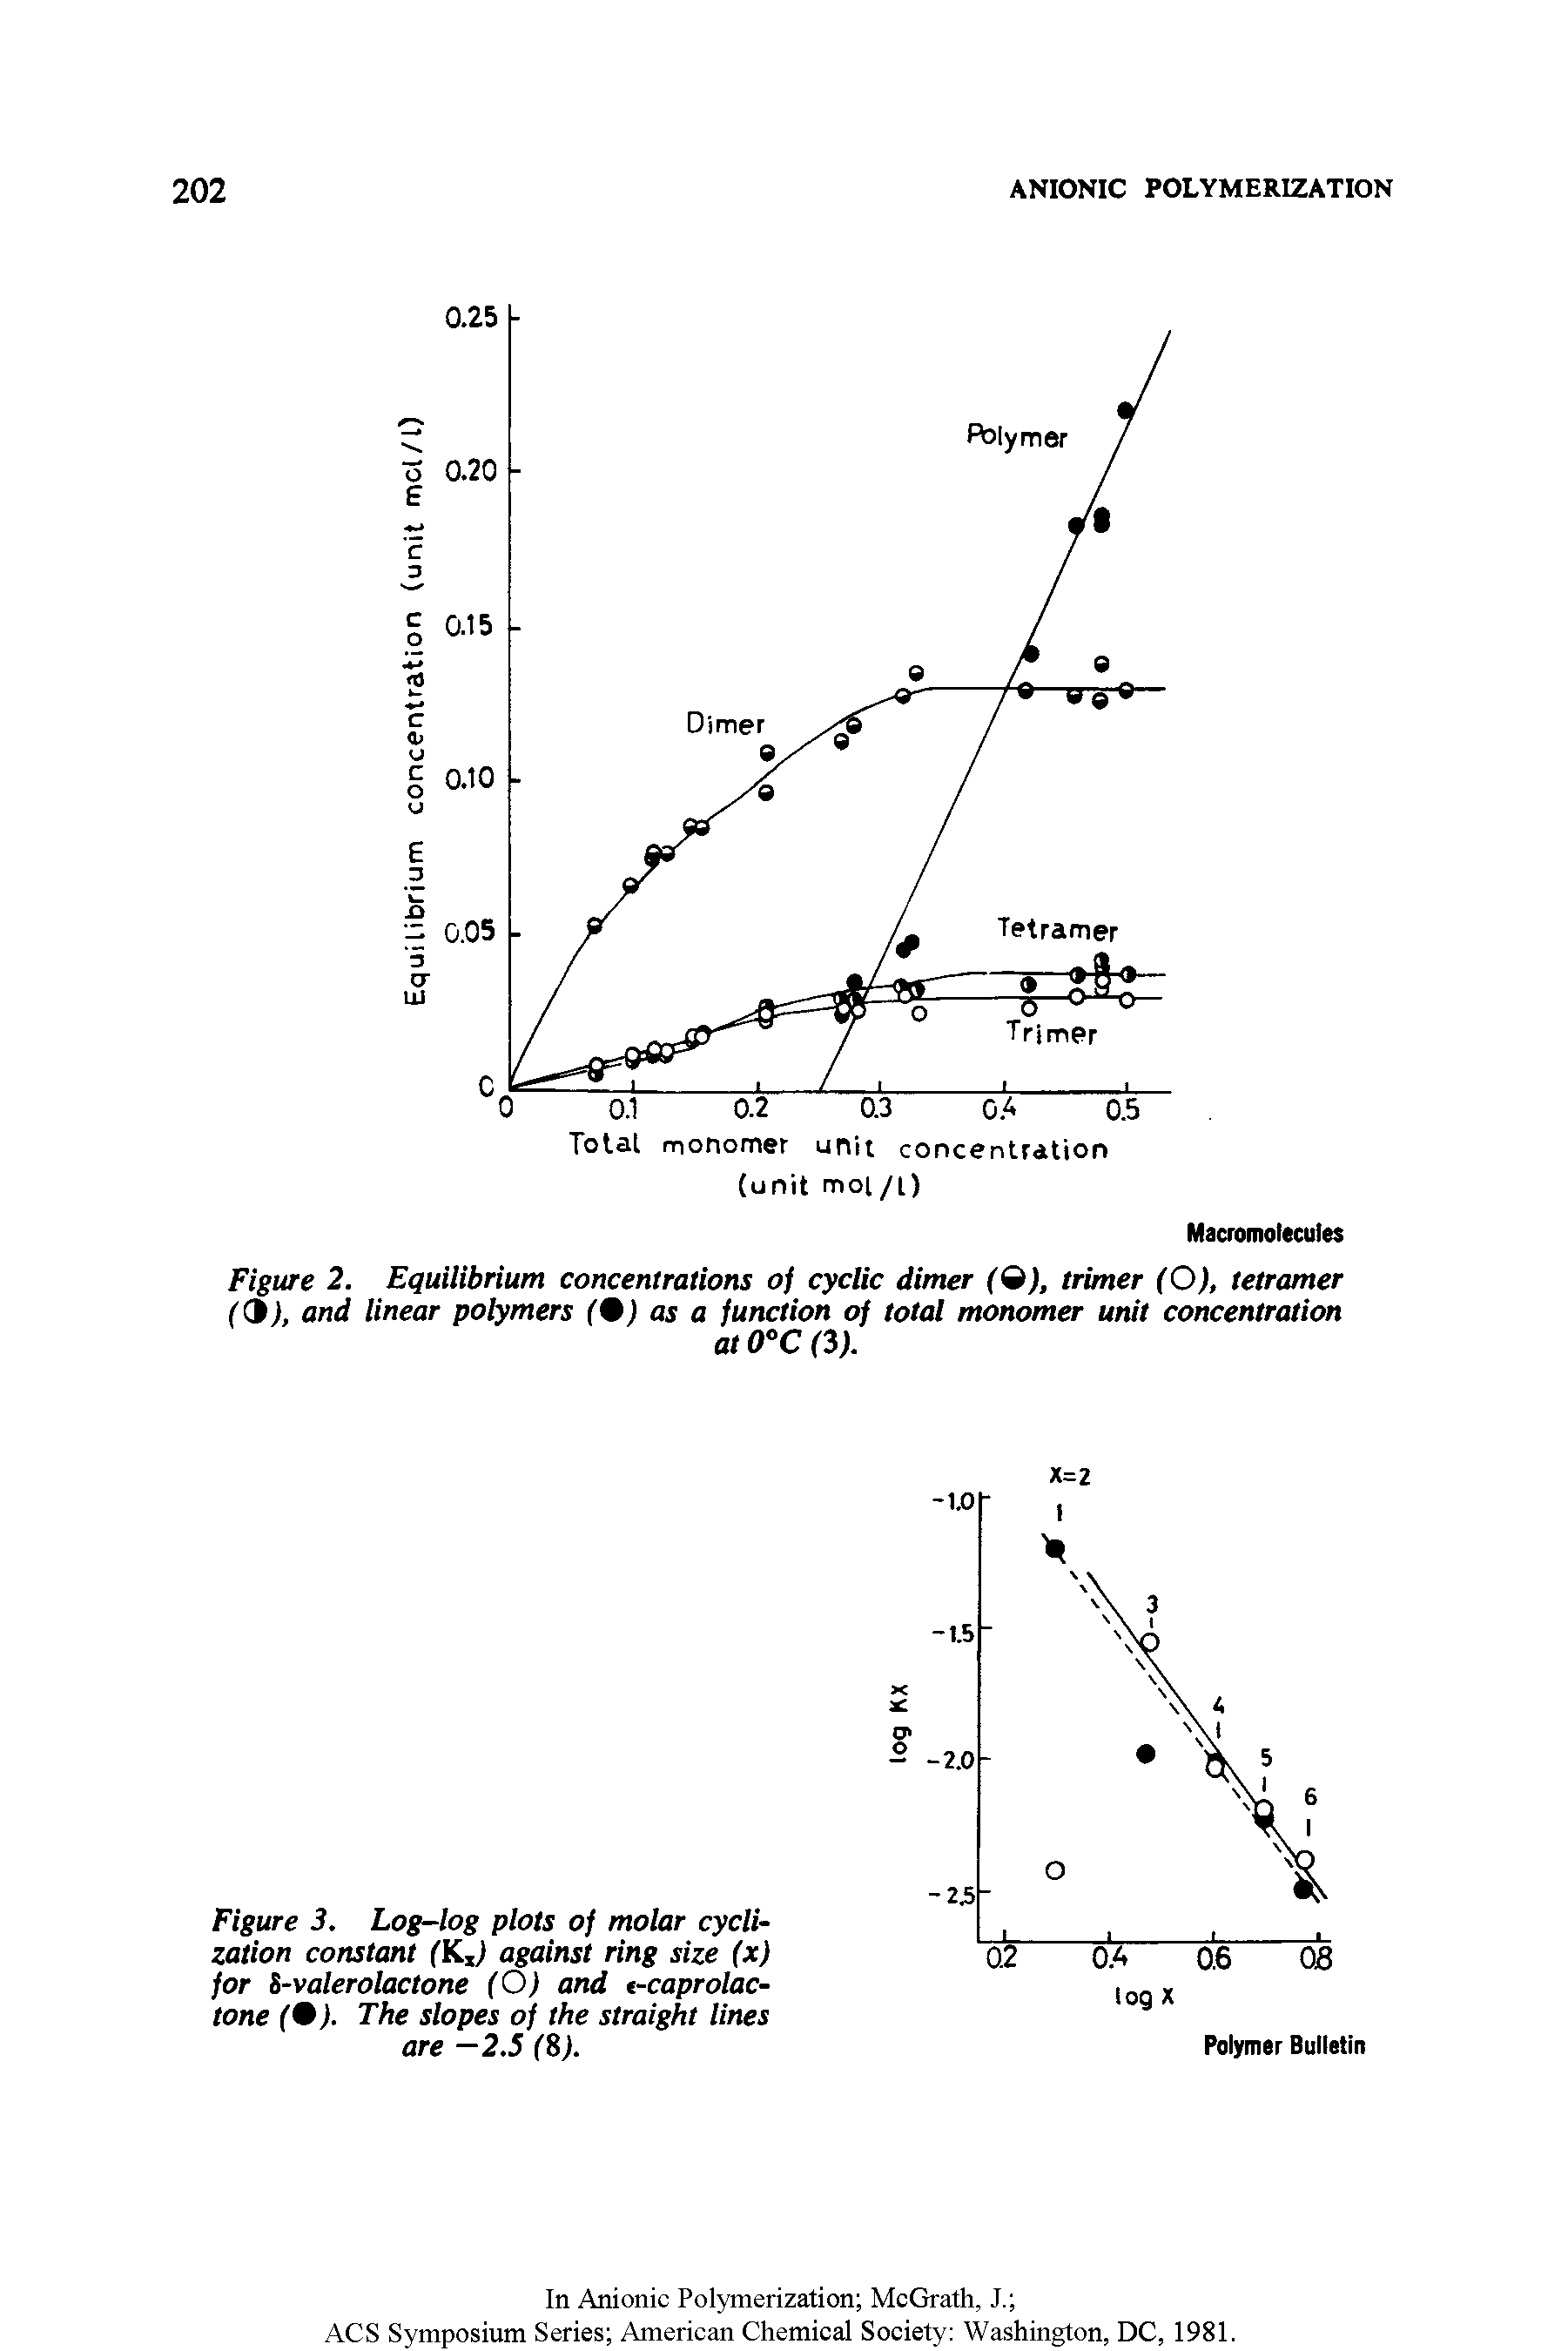 Figure 2. Equilibrium concentrations of cyclic dimer (9), trimer (O), tetramer (d), and linear polymers (9) as a function of total monomer unit concentration...